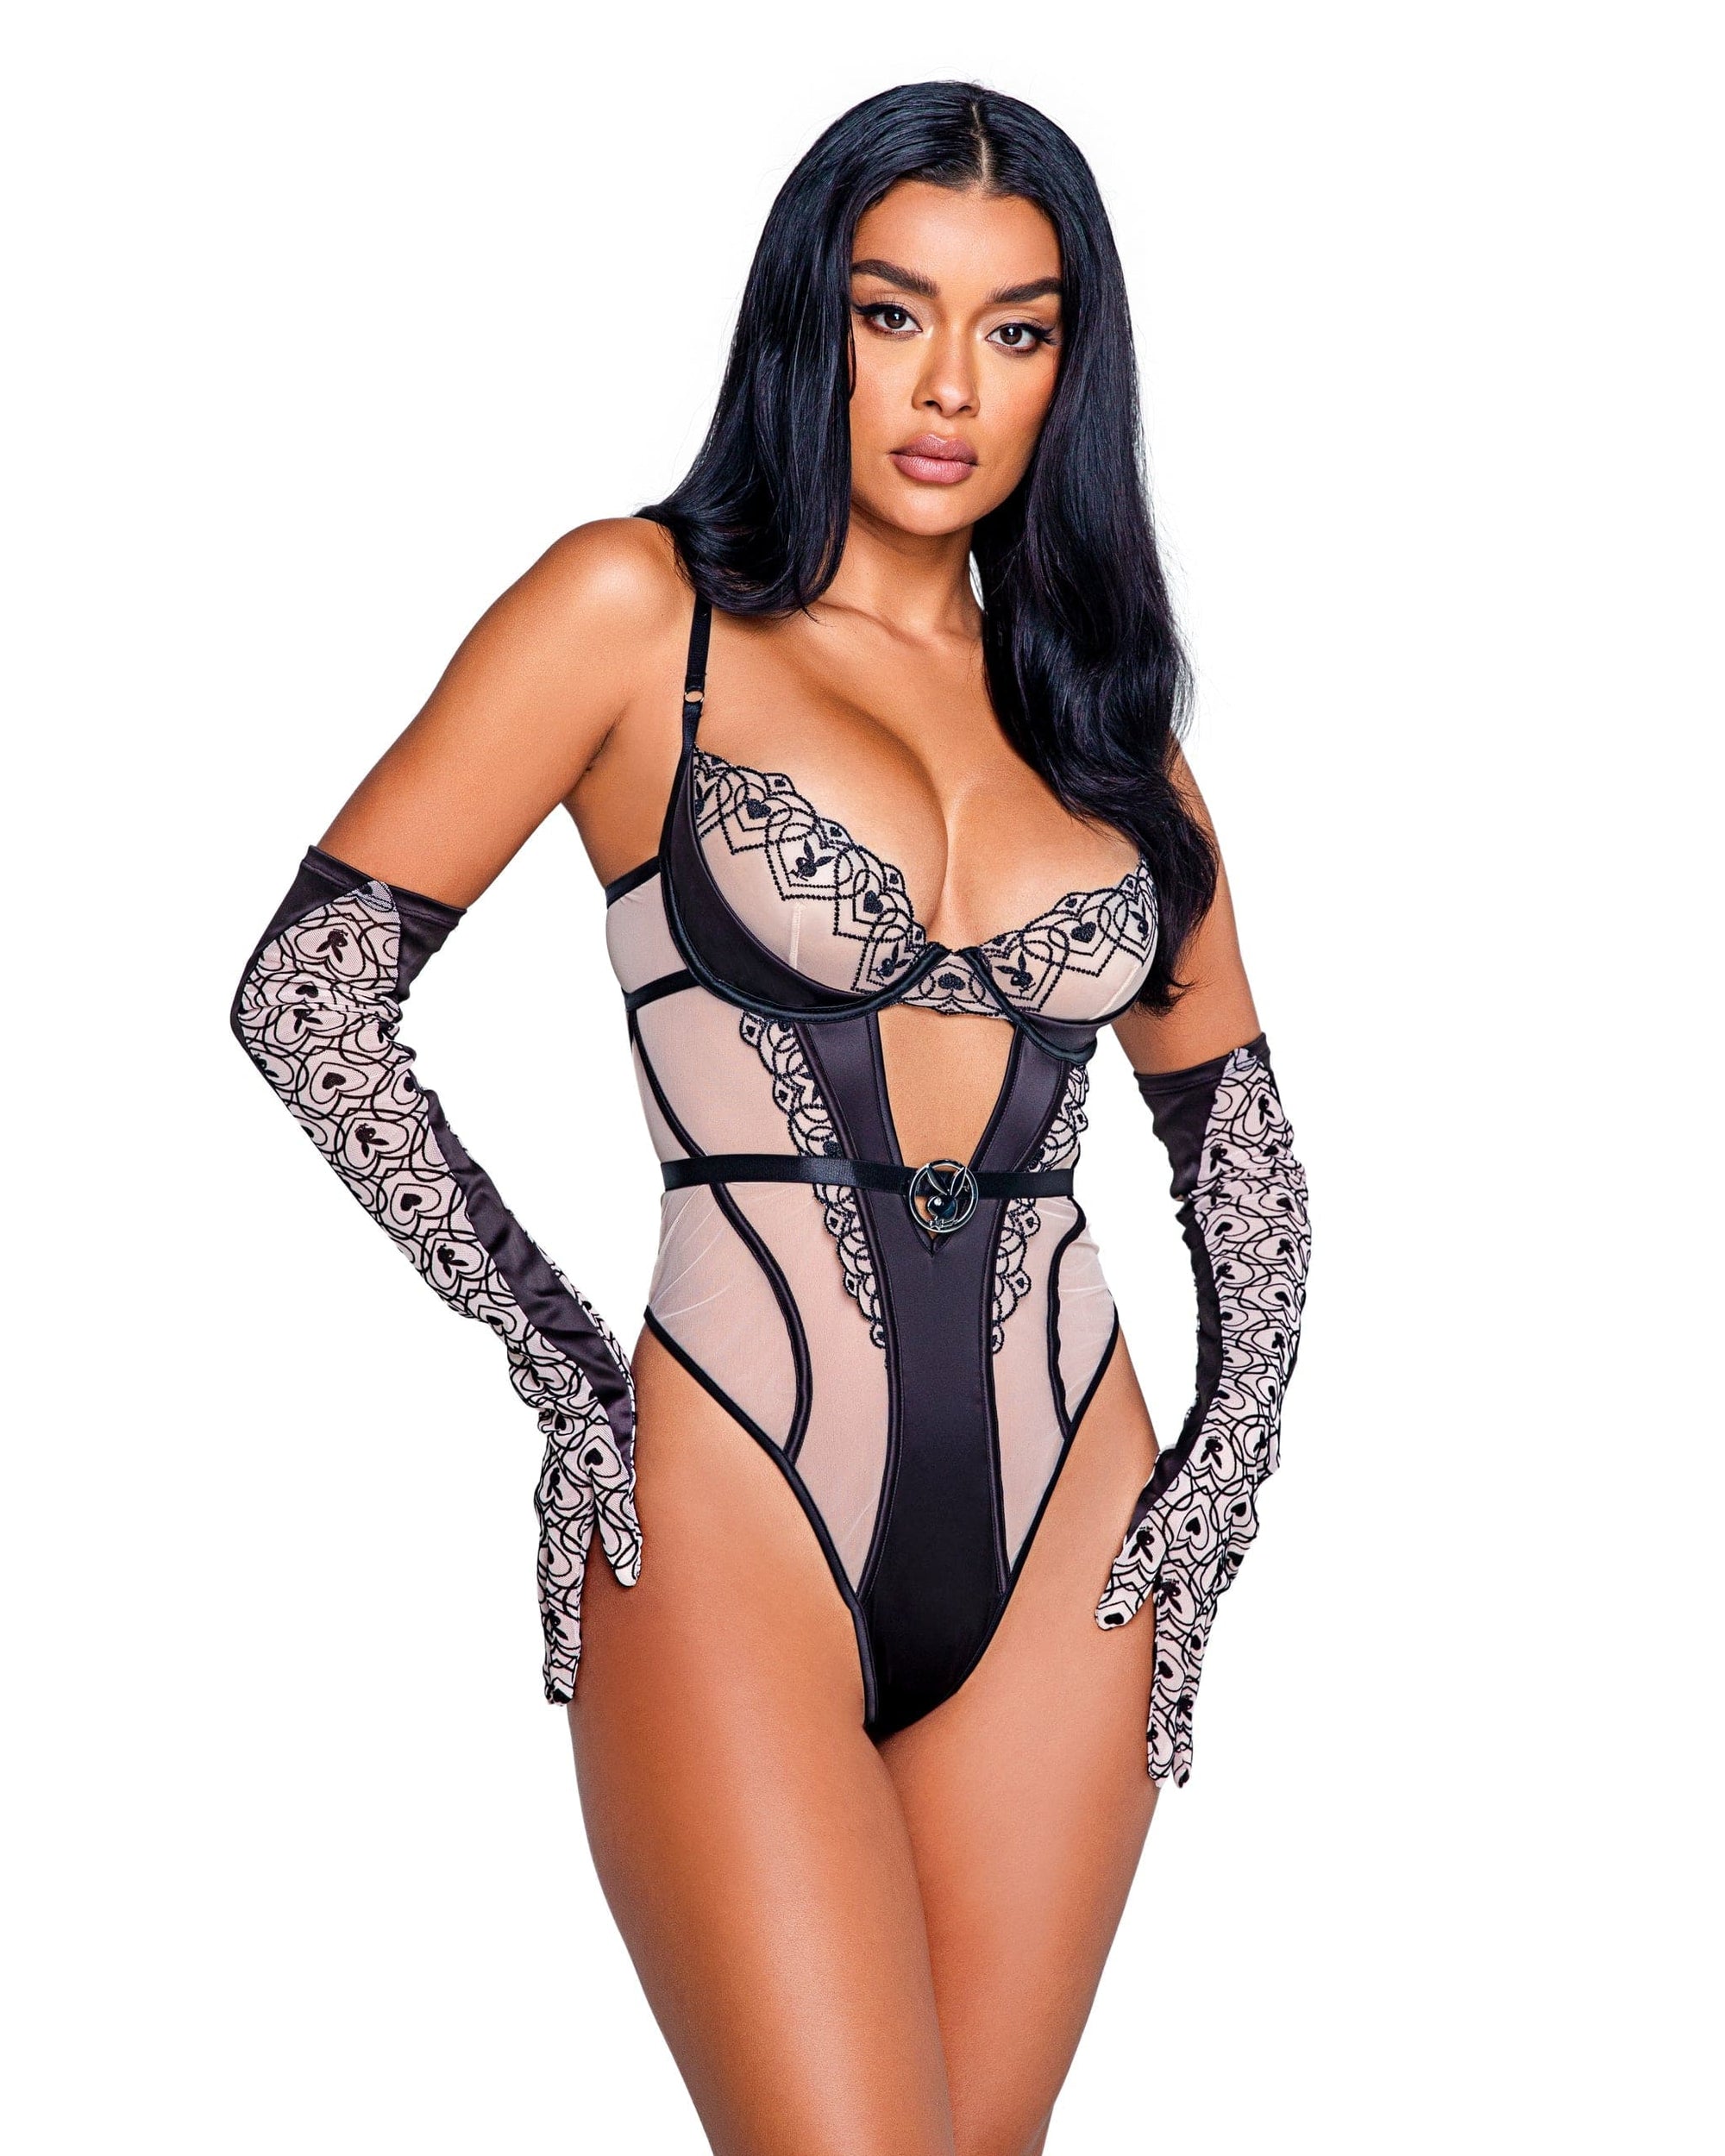 Roma Nude Sheer Mesh Playboy Underwire Top Thong Teddy w/ Logo (Plus Size Available) 2024 Sexy Playboy Pink Sheer Mesh Underwire Thong Teddy Lingerie  Apparel & Accessories > Clothing > Underwear & Socks > Lingerie